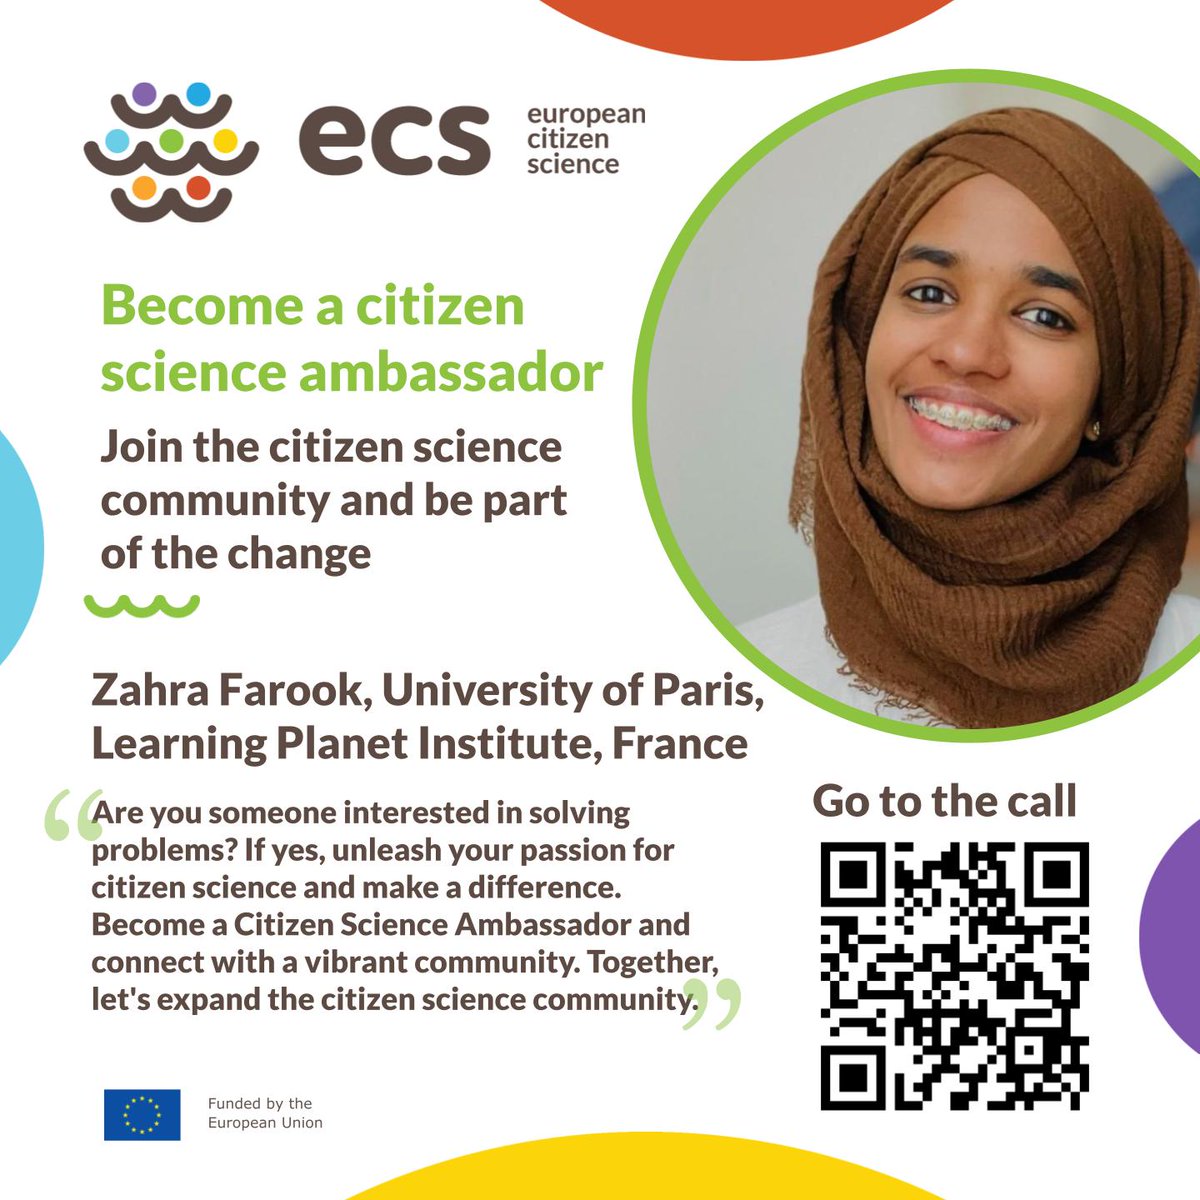 Unleash your passion for #CitizenScience and become one of our 28 #CitizenScience ambassadors. The call is open until June 29: eu-citizen.science/call_ambassado……
Let's expand the citizen science community together.
@REA_research
@EUScienceInnov
@HorizonEU
@lpiparis_